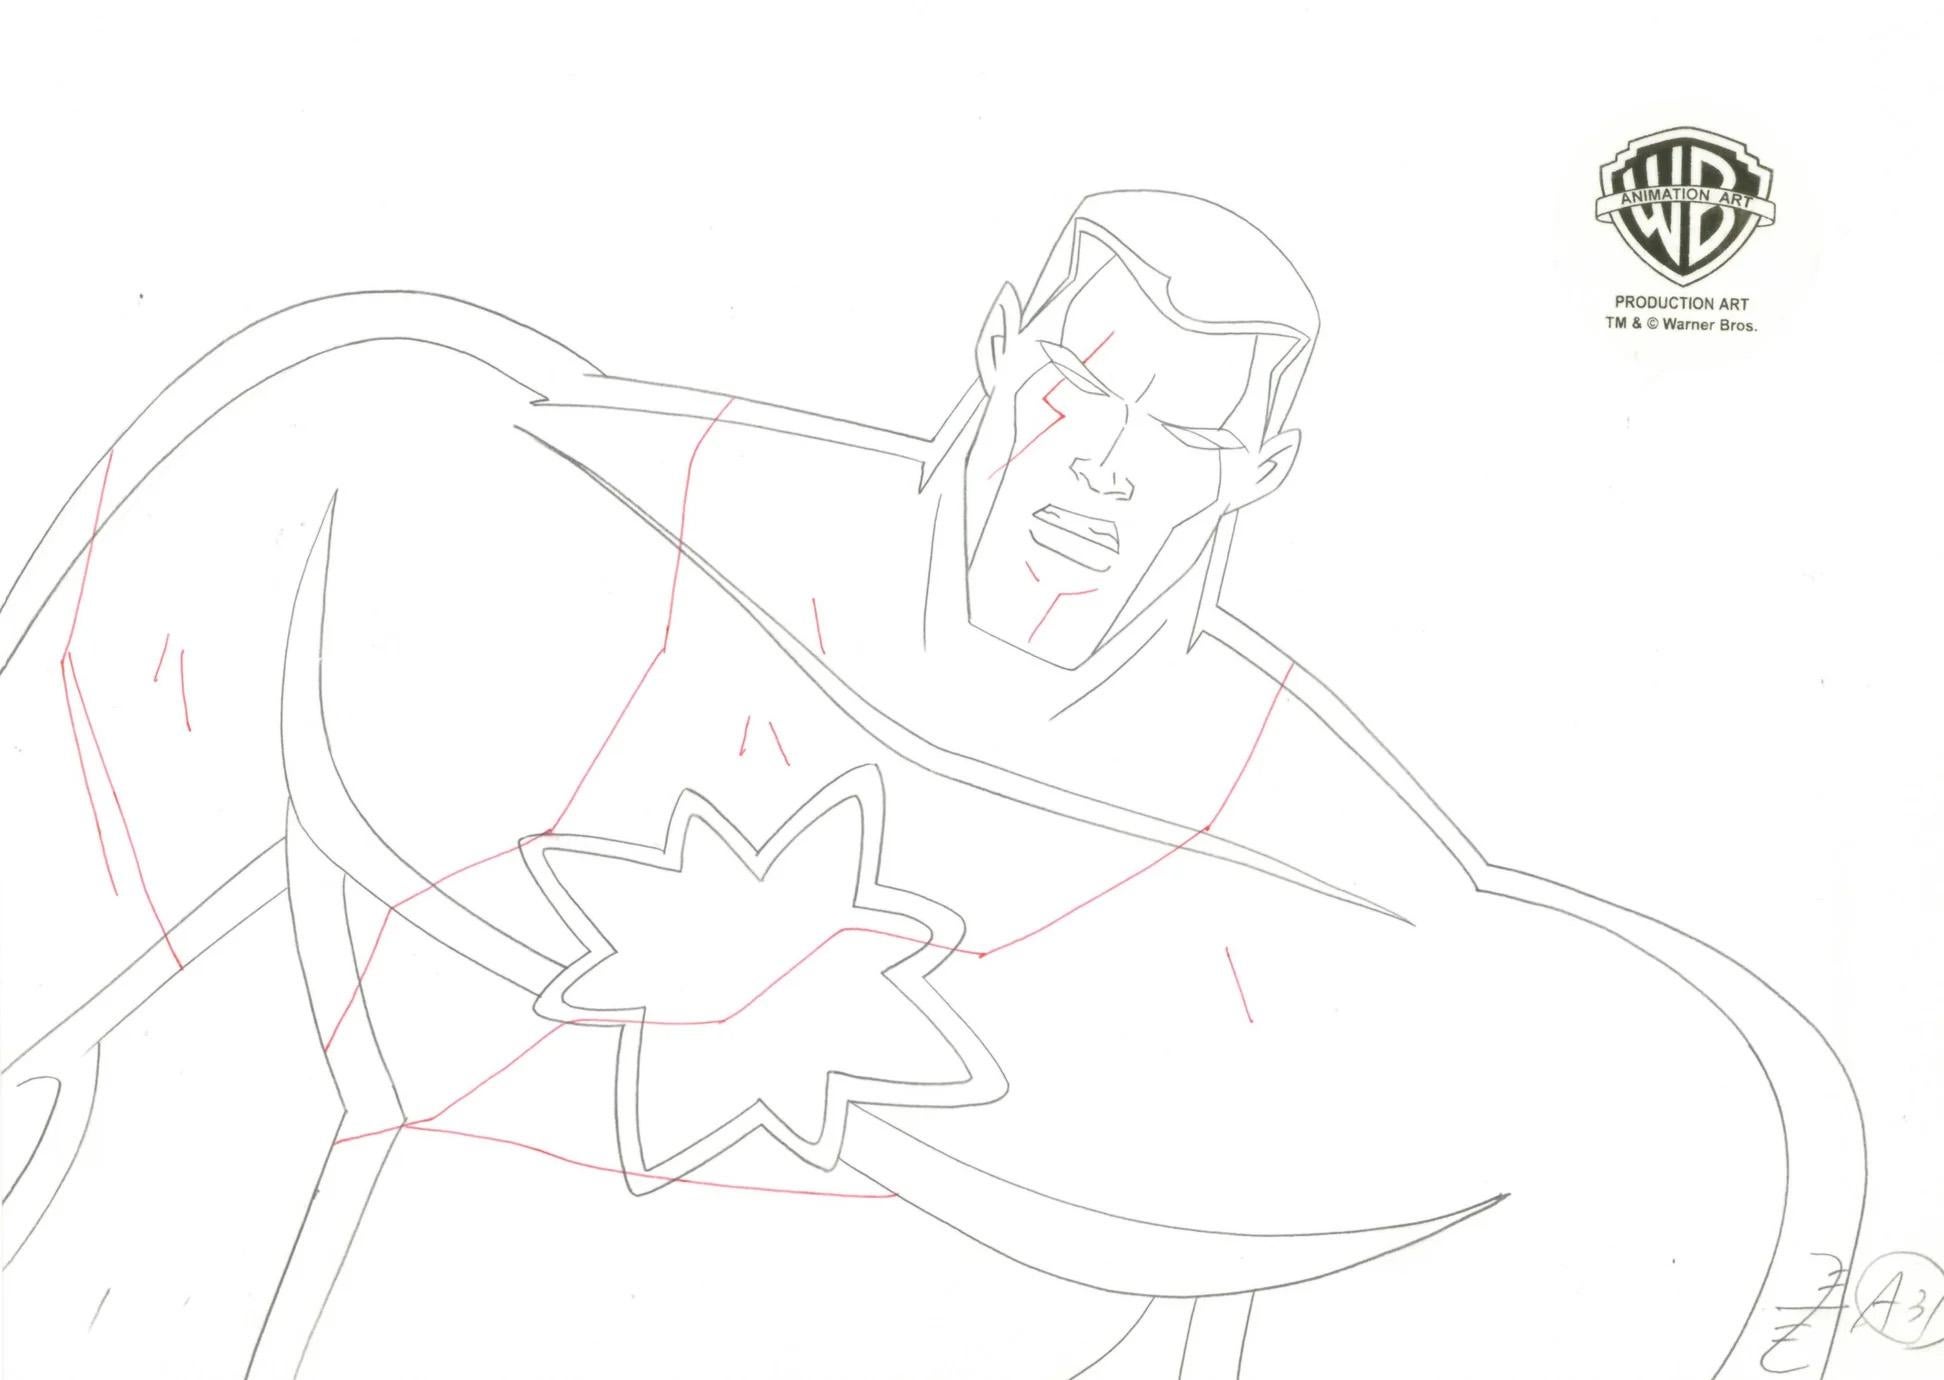 Justice League Unlimited Original Production Drawing: Captain Atom - Art by Warner Bros. Studio Artists